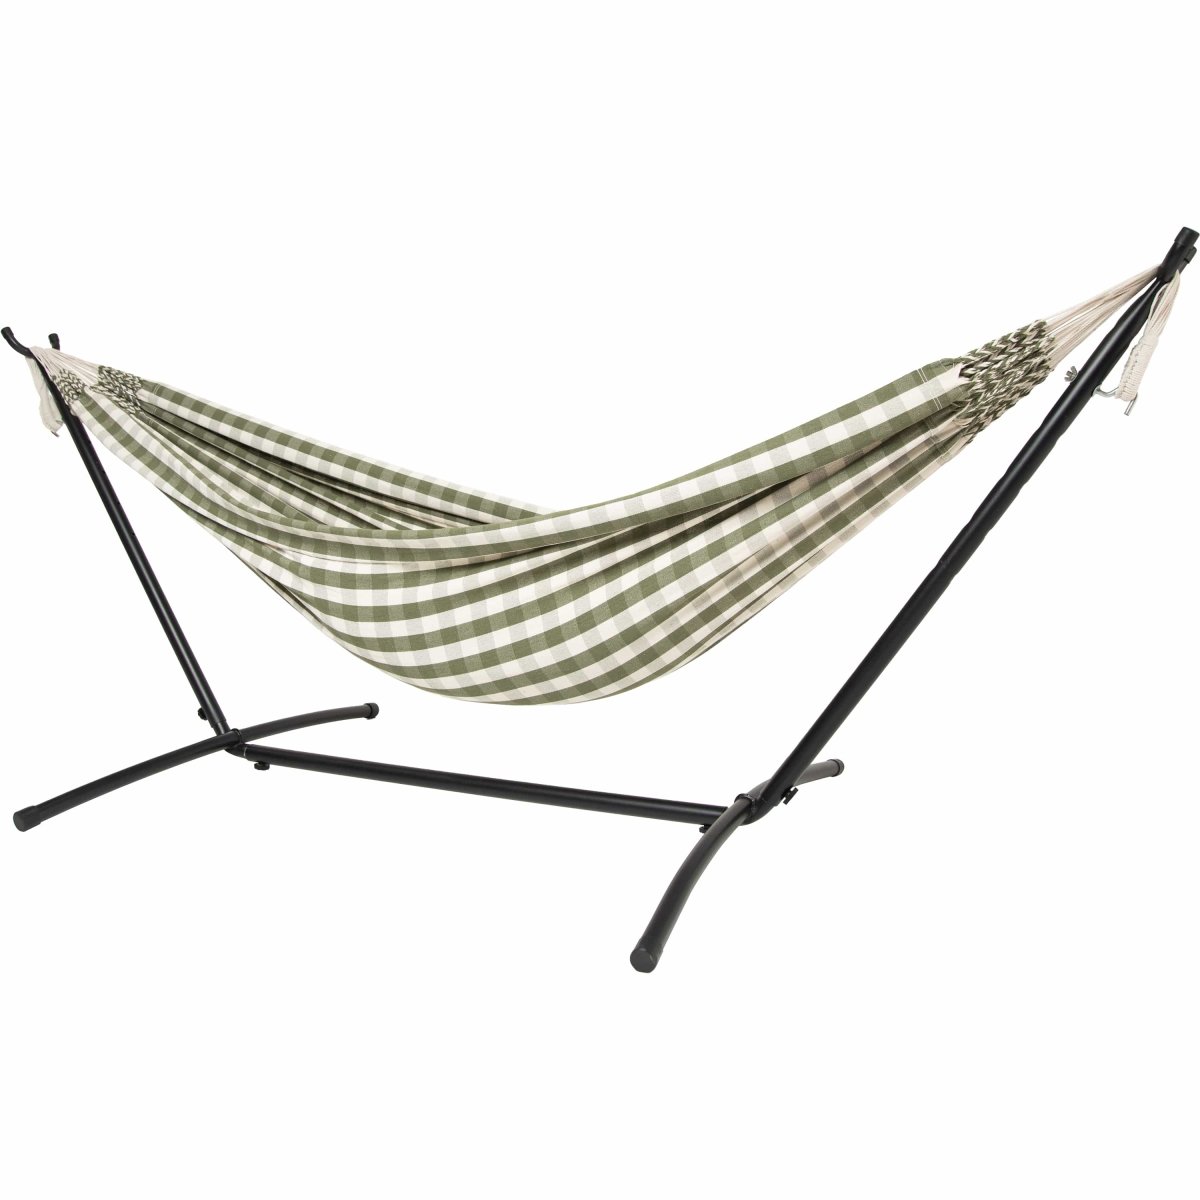 10ft Black Universal Steel Hammock Stand &amp; Authentic Double Vichy Hammock in Urban Olive - Outdoorium